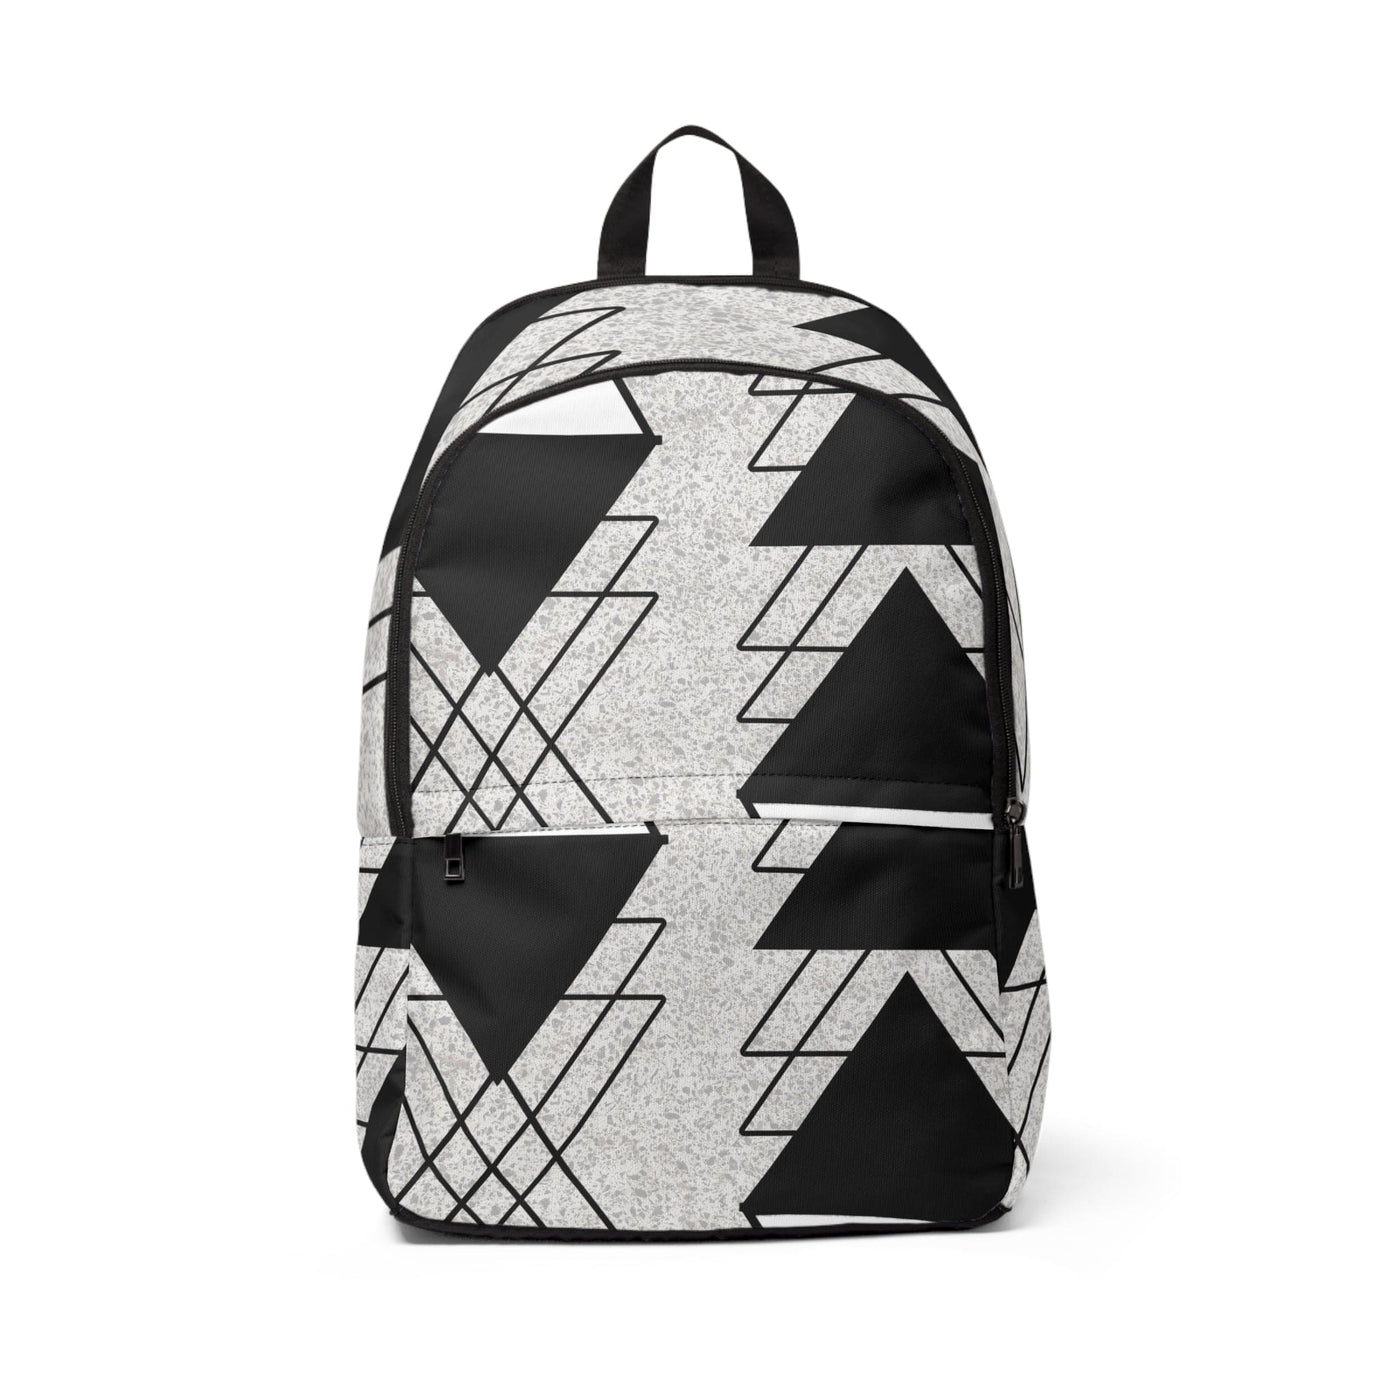 Fashion Backpack Waterproof Black And White Ash Grey Triangular Colorblock